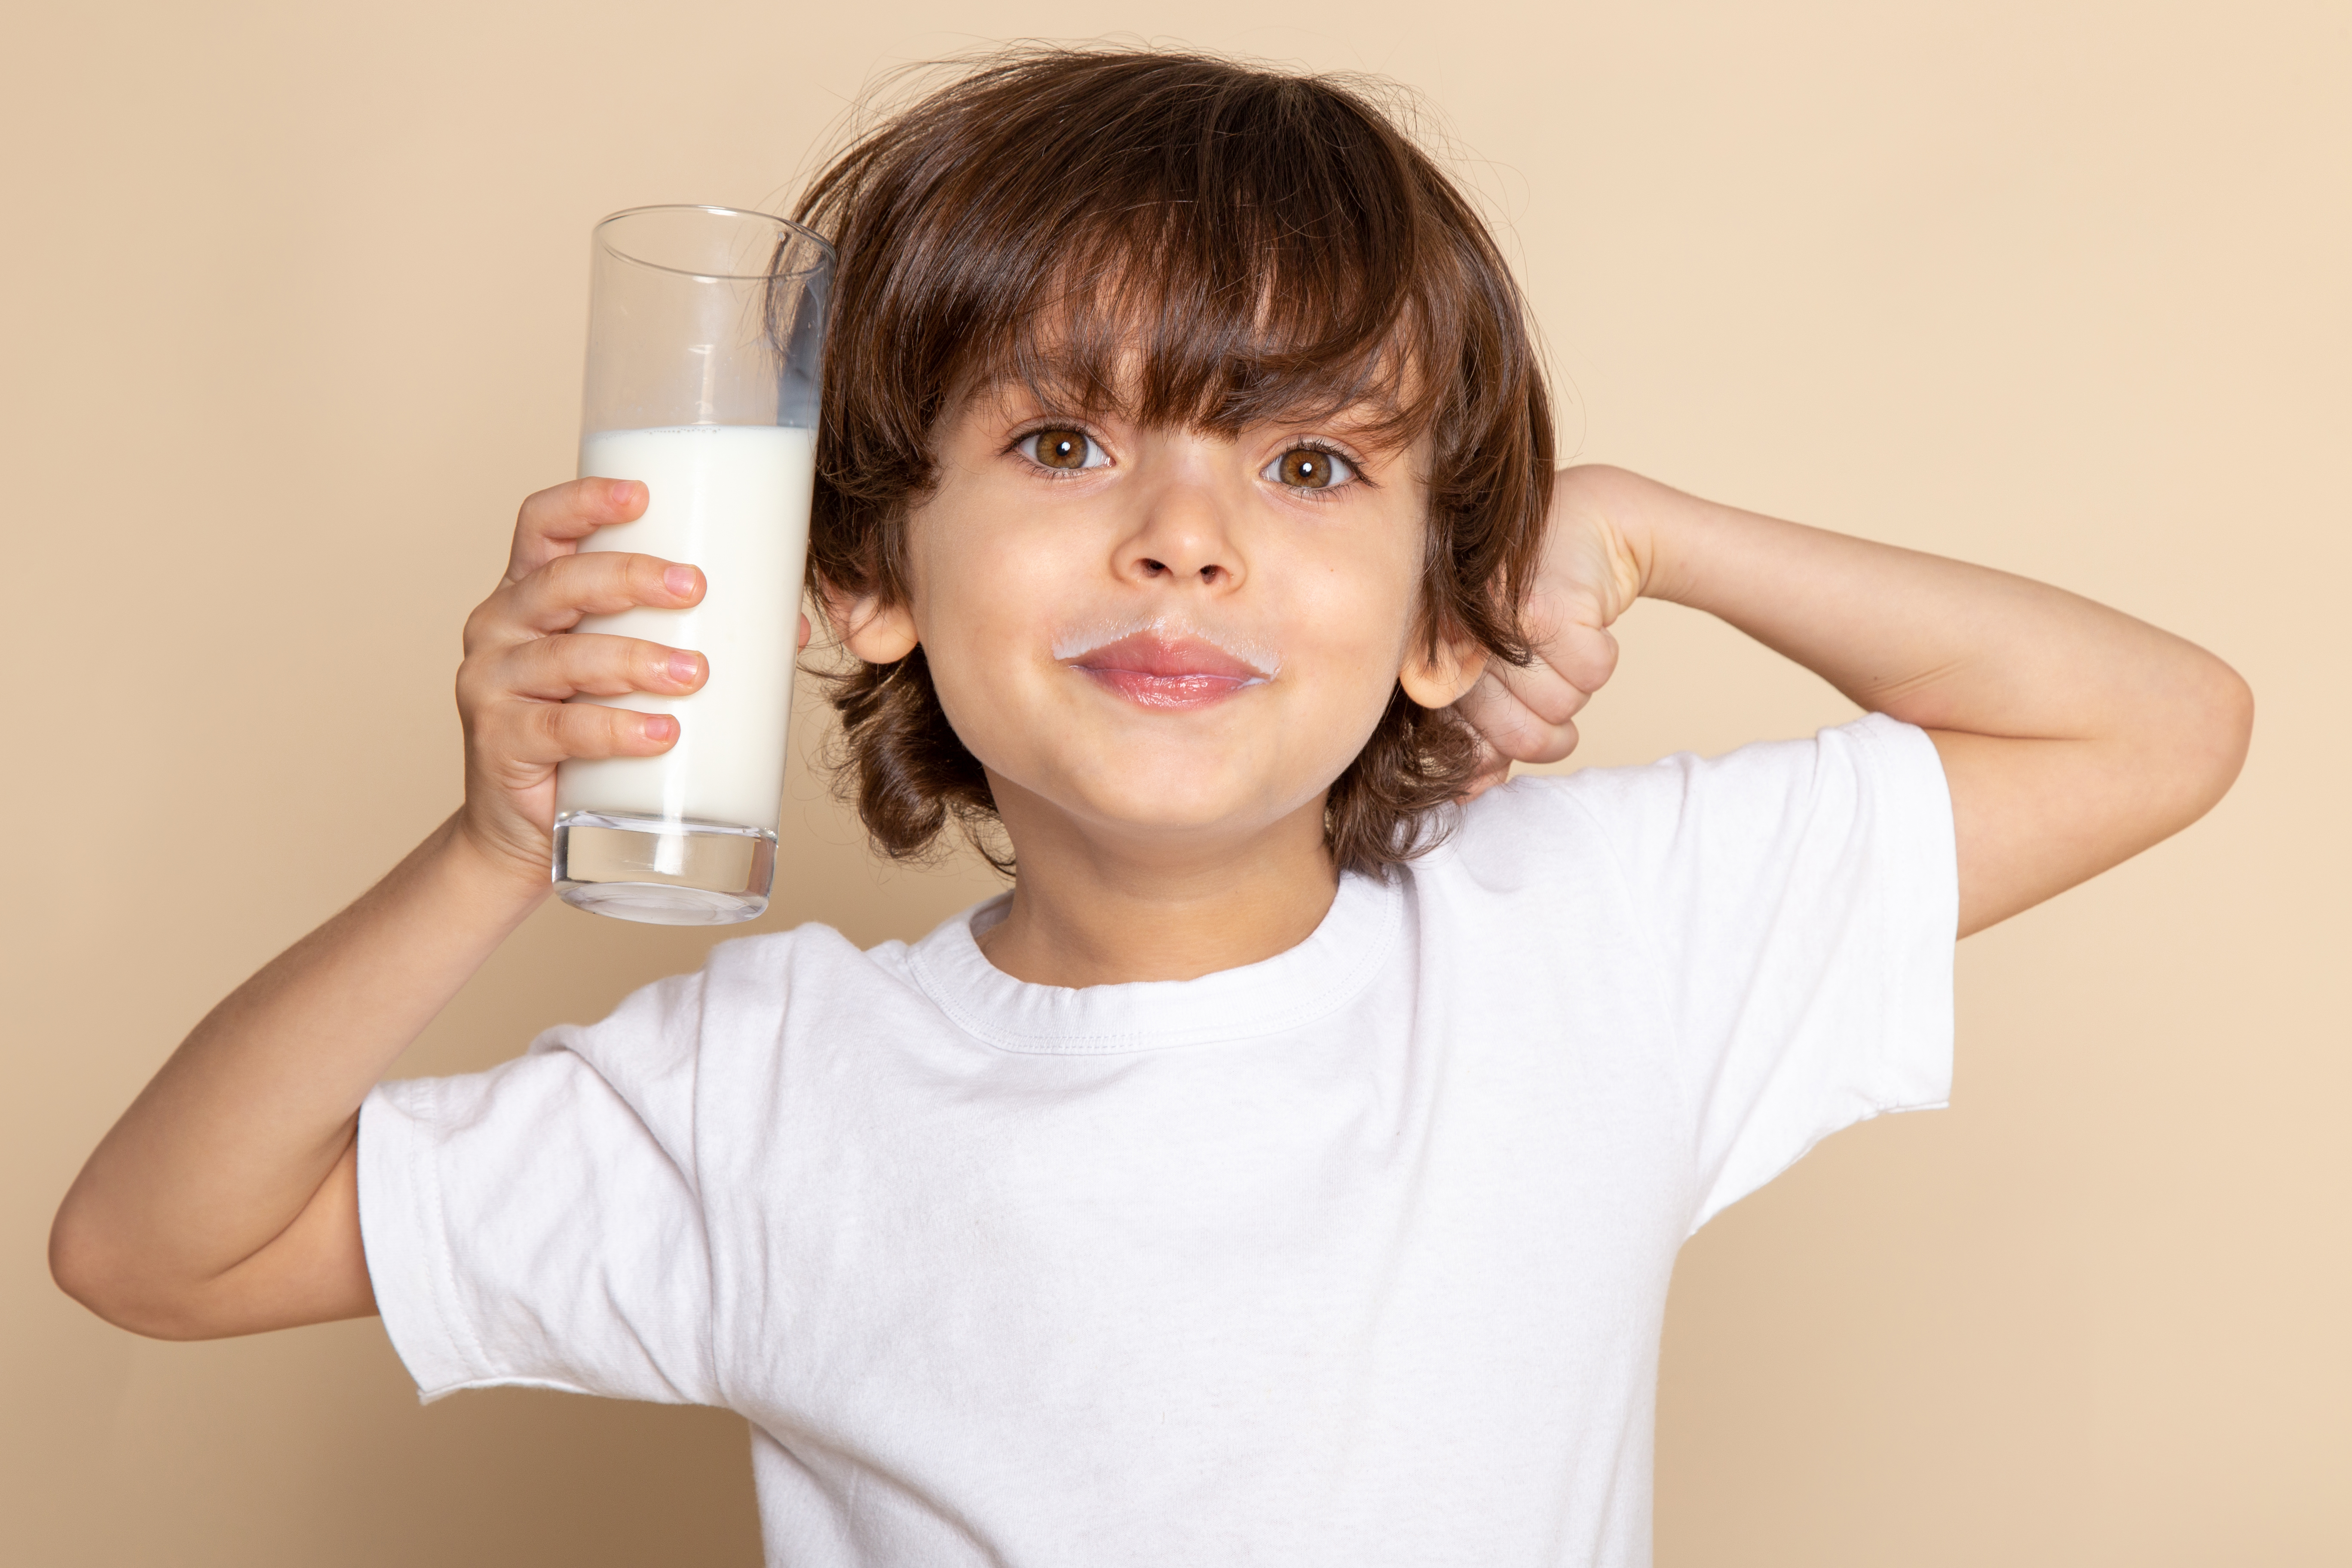 Milk consumption leads to increased muscle mass